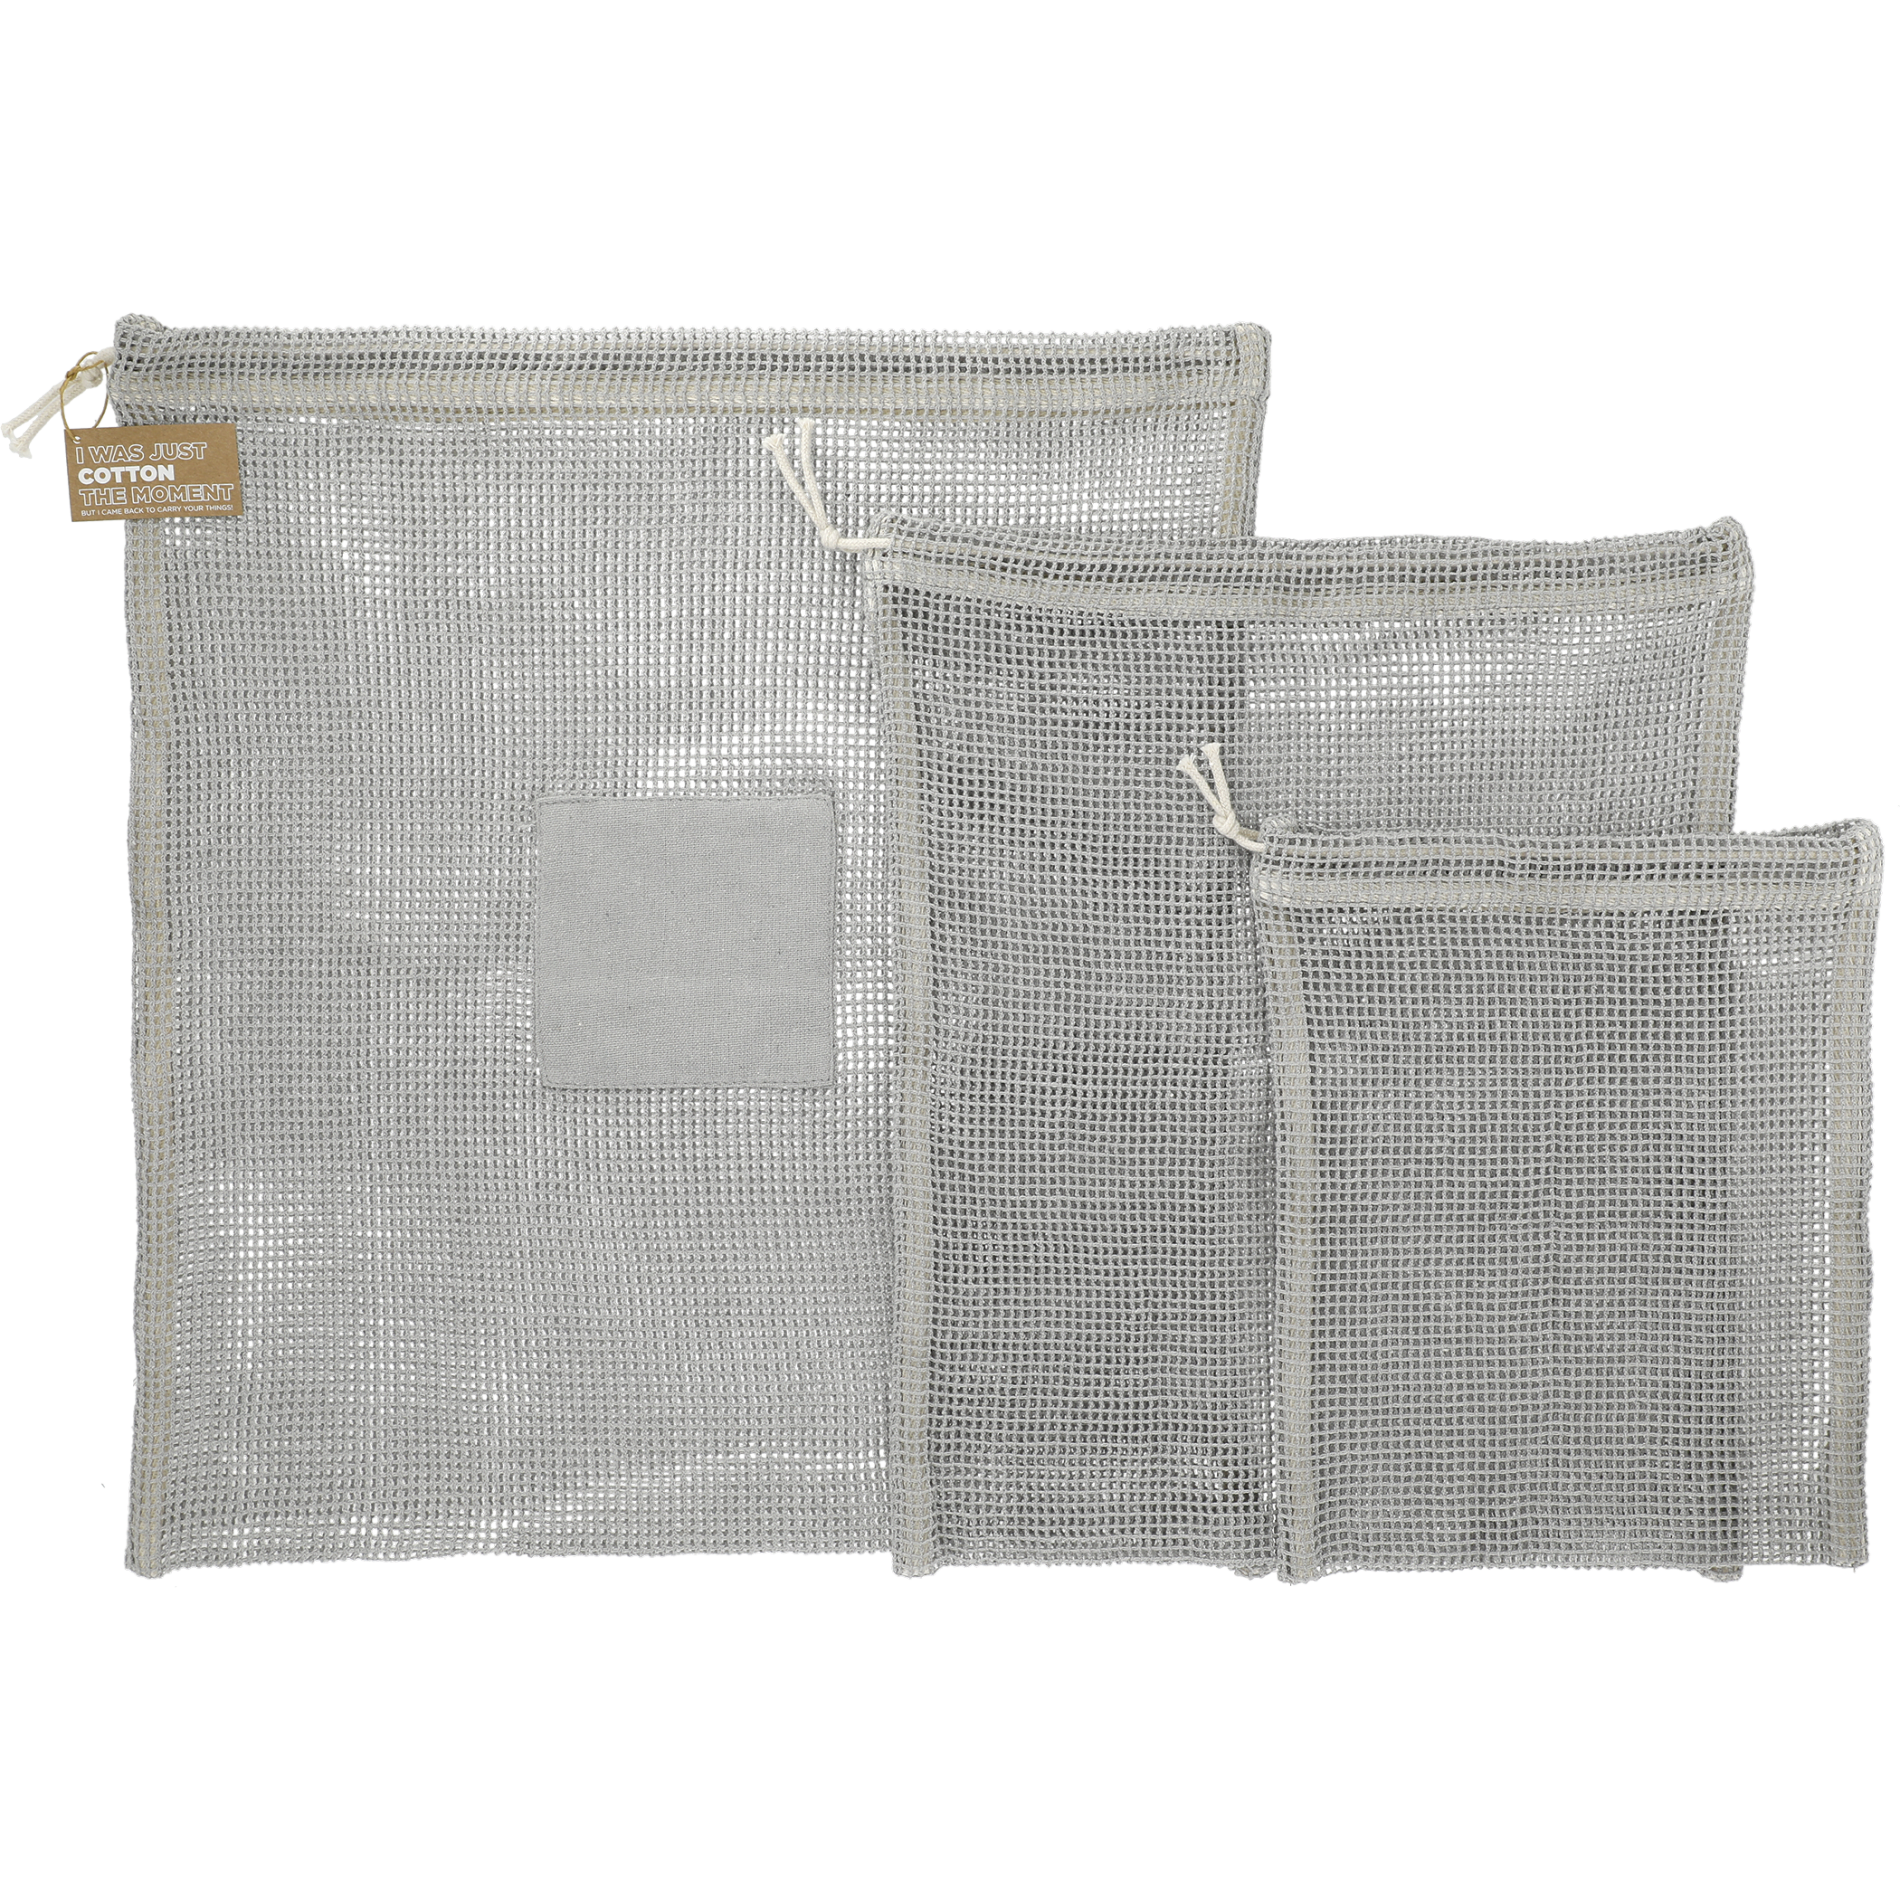 LEEDS 7901-19 - Recycled Cotton Mesh Cinch Pouch Set